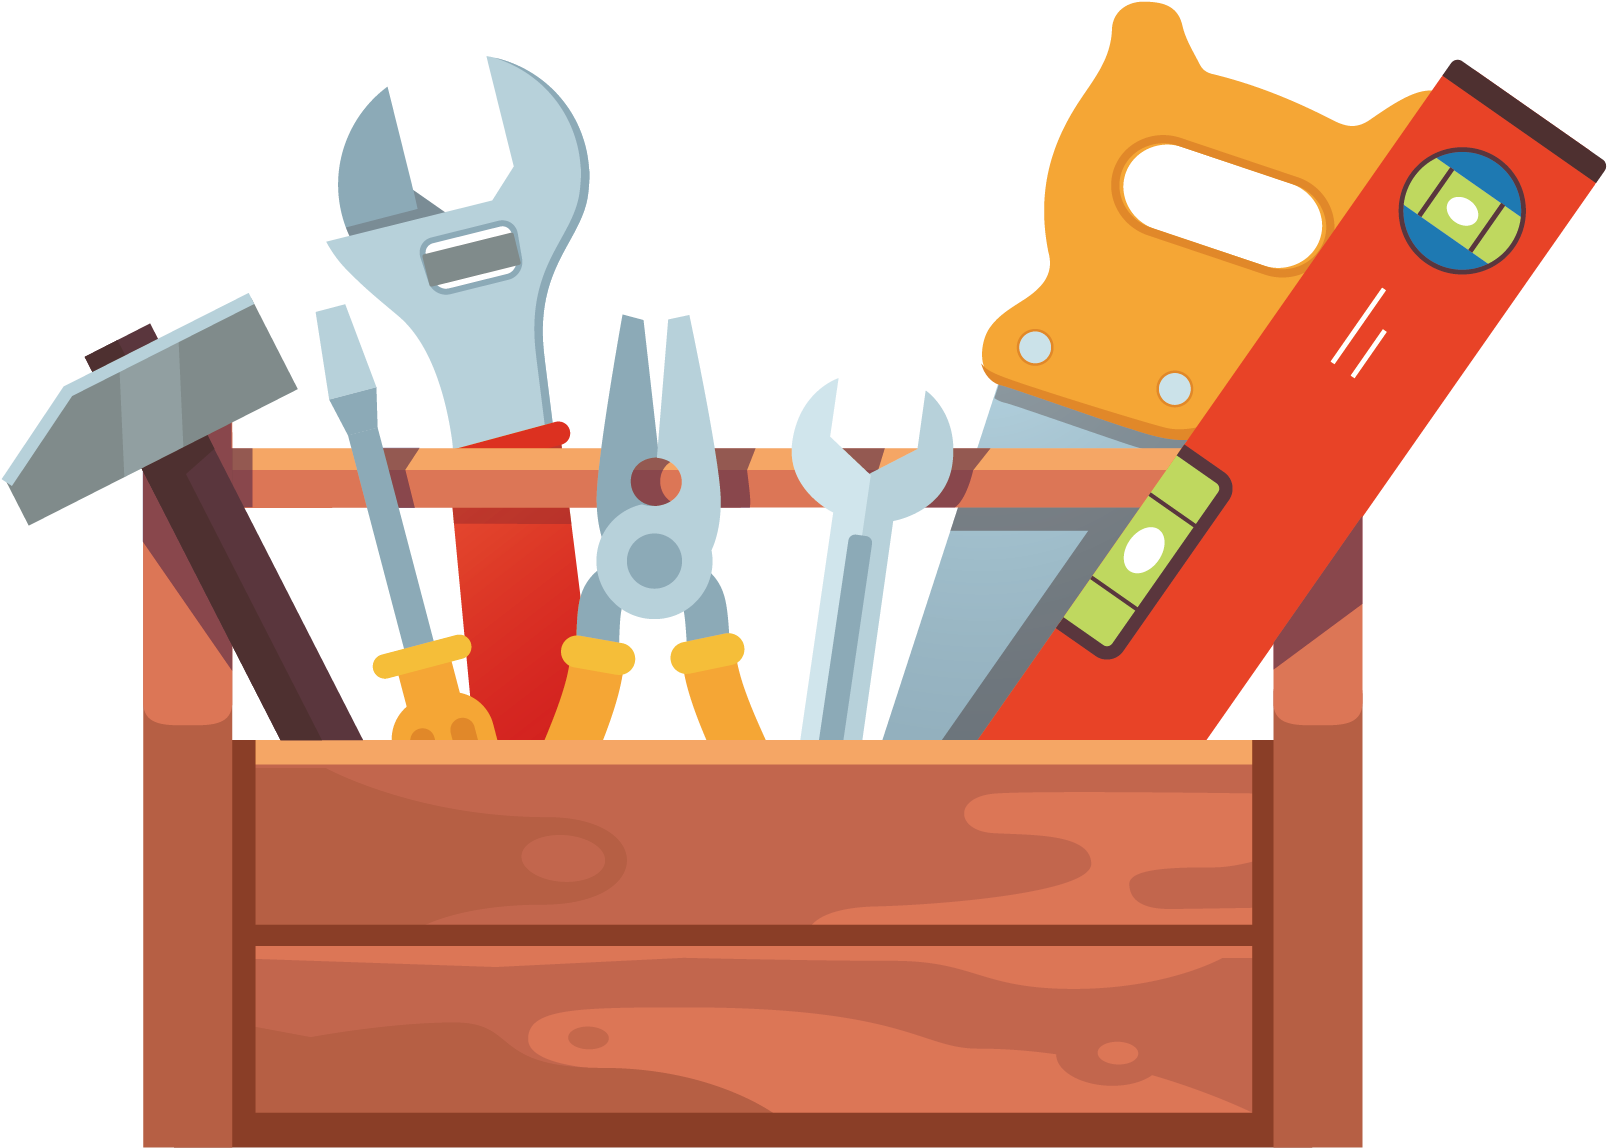 writers-toolbox-toolbox-clipart-free-transparent-clipart-clipartkey